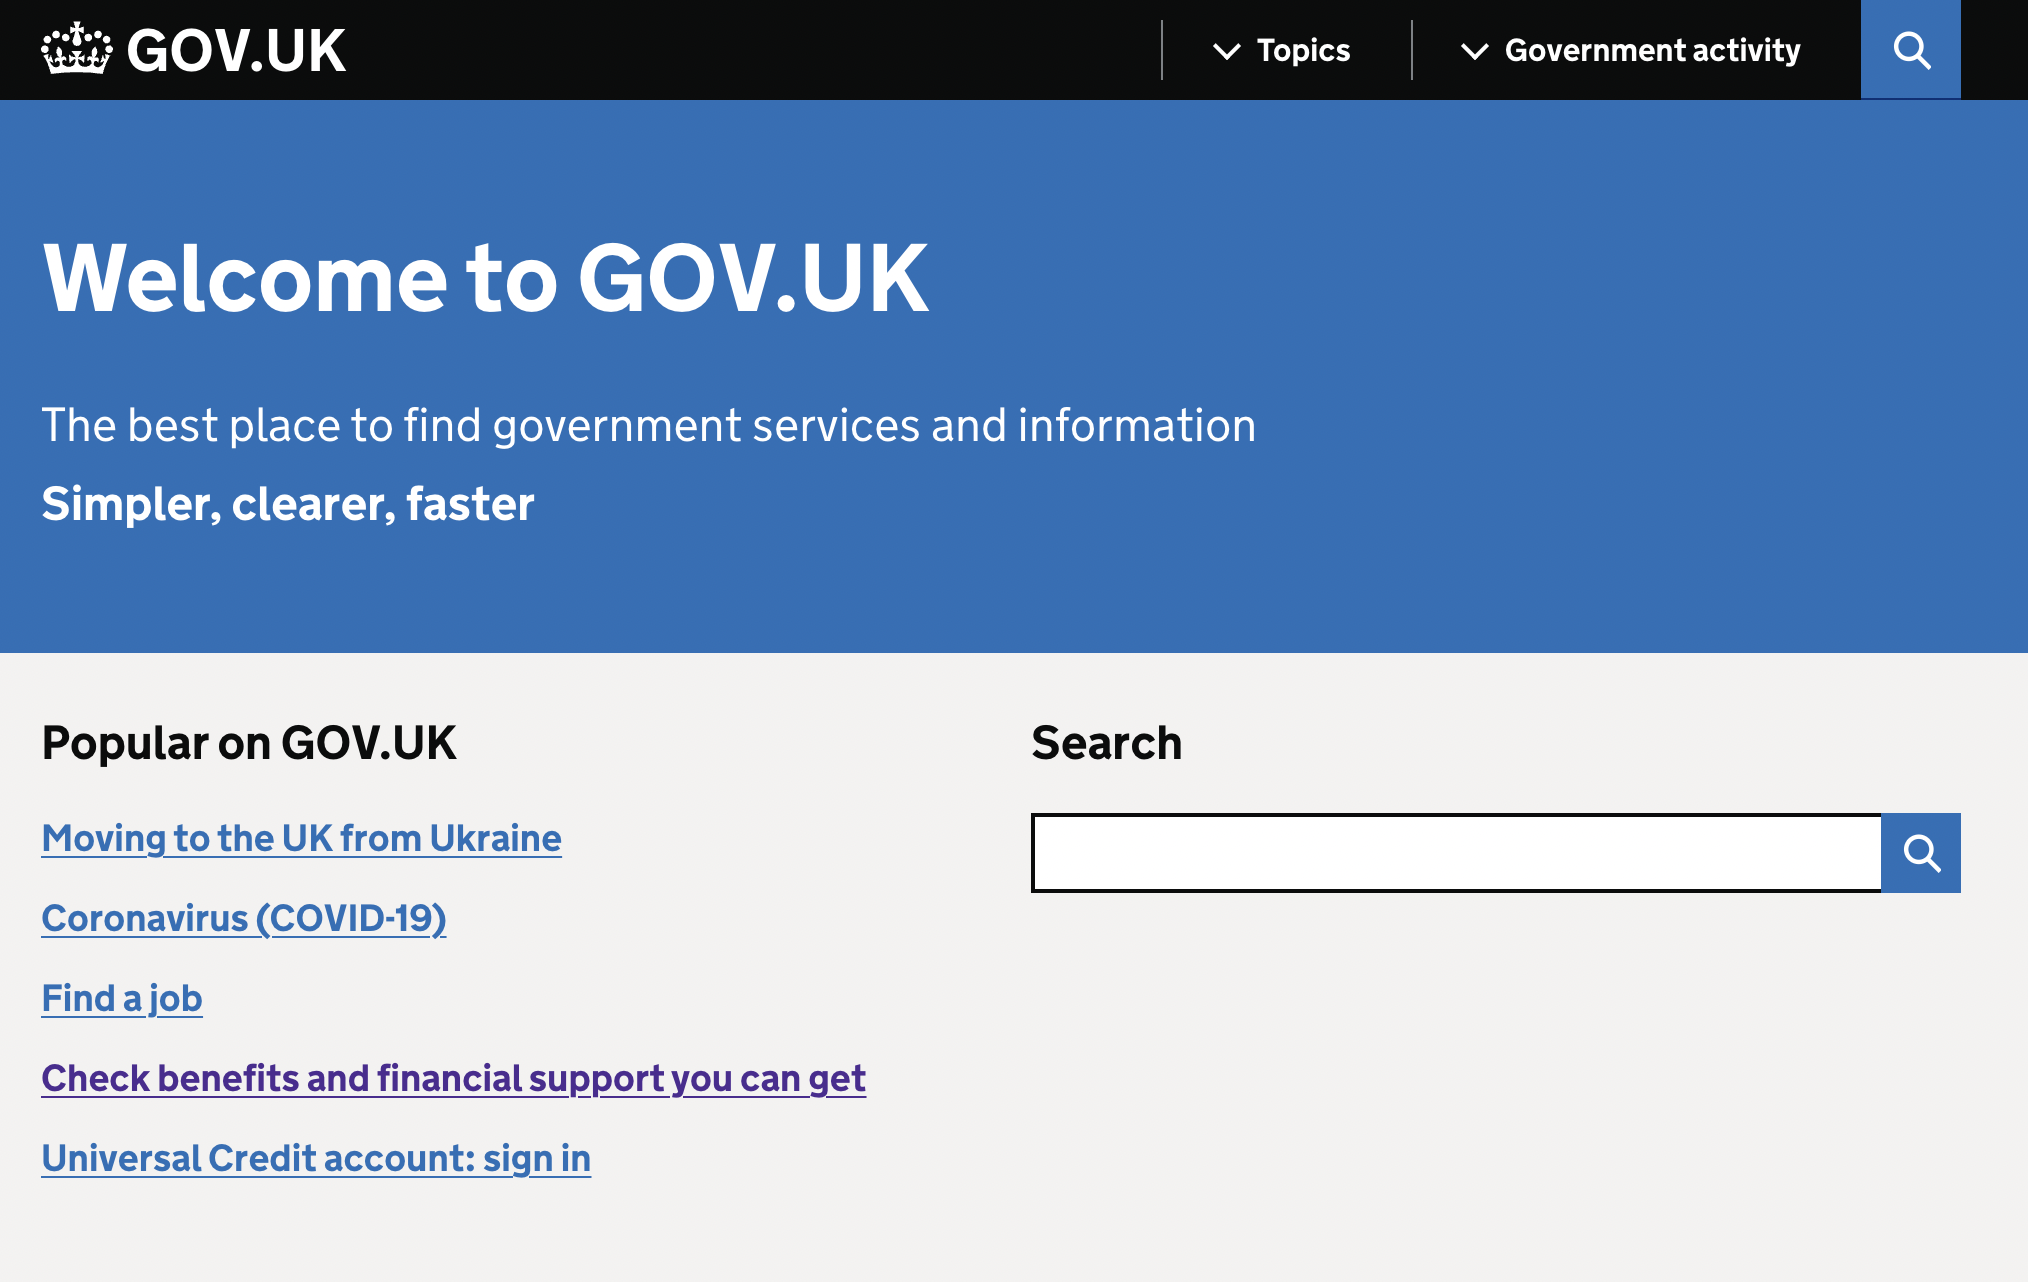 Image of the popular links on the GOV.UK homepage